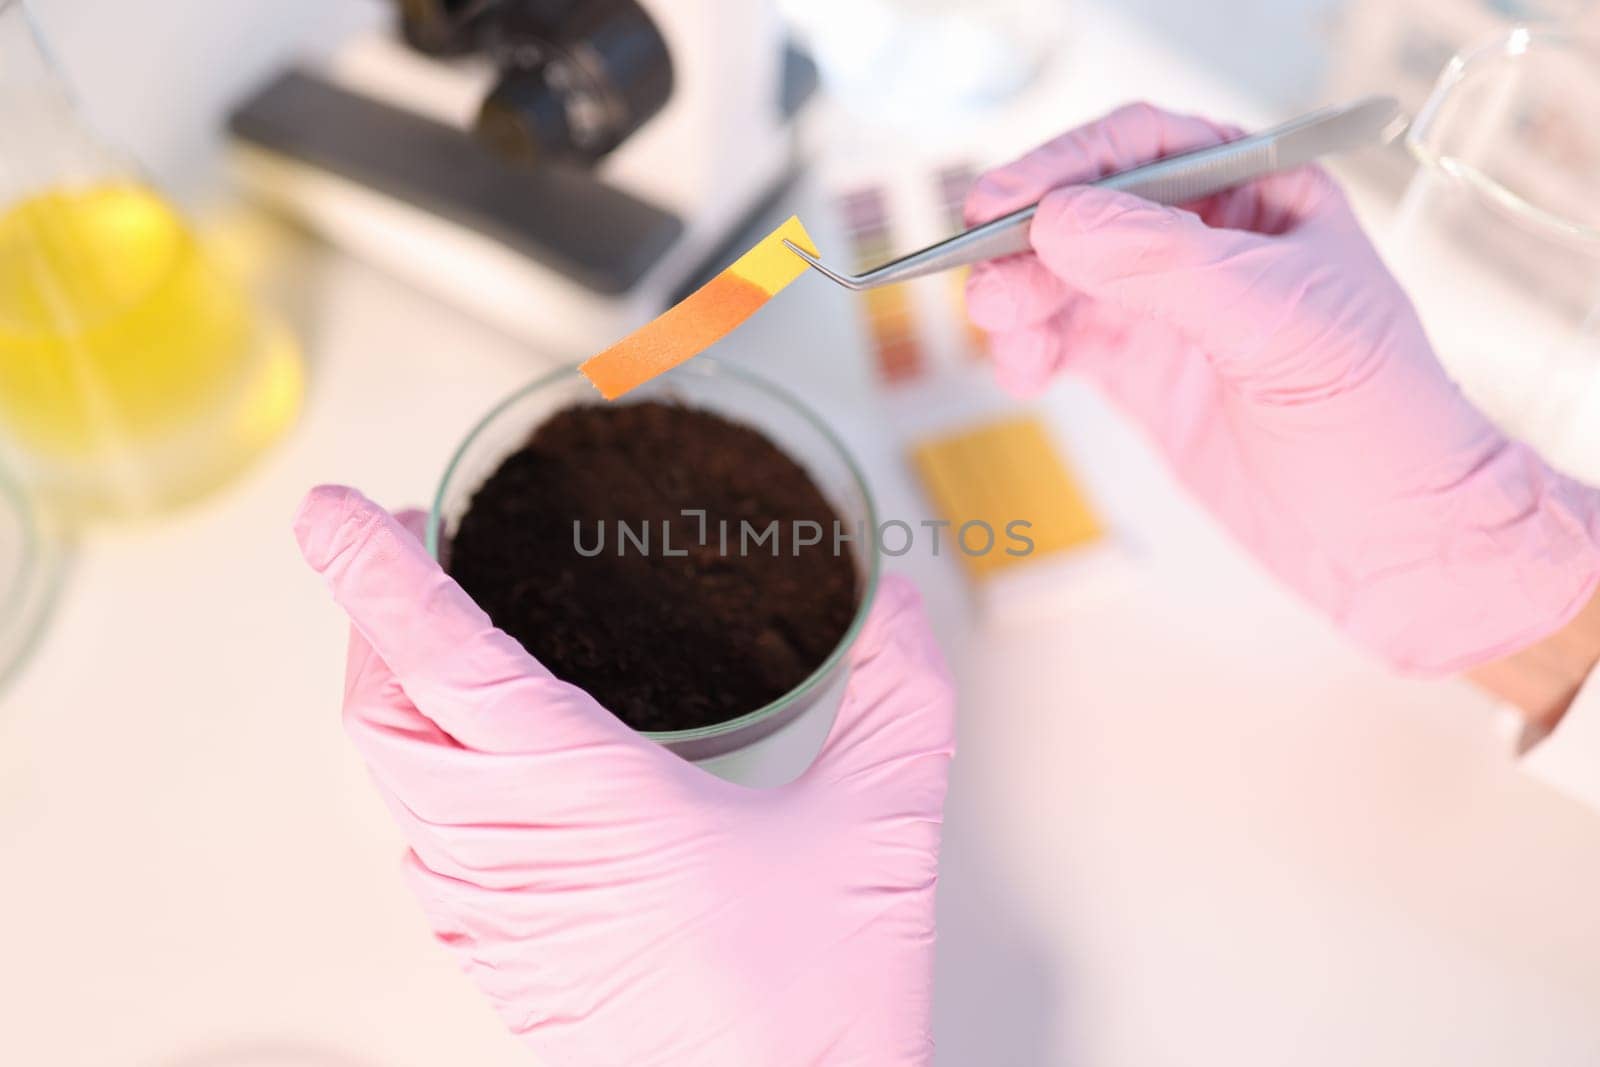 Laboratory analysis of soil contamination and test strip. Scientist measures pH of soil sample using litmus strips concept